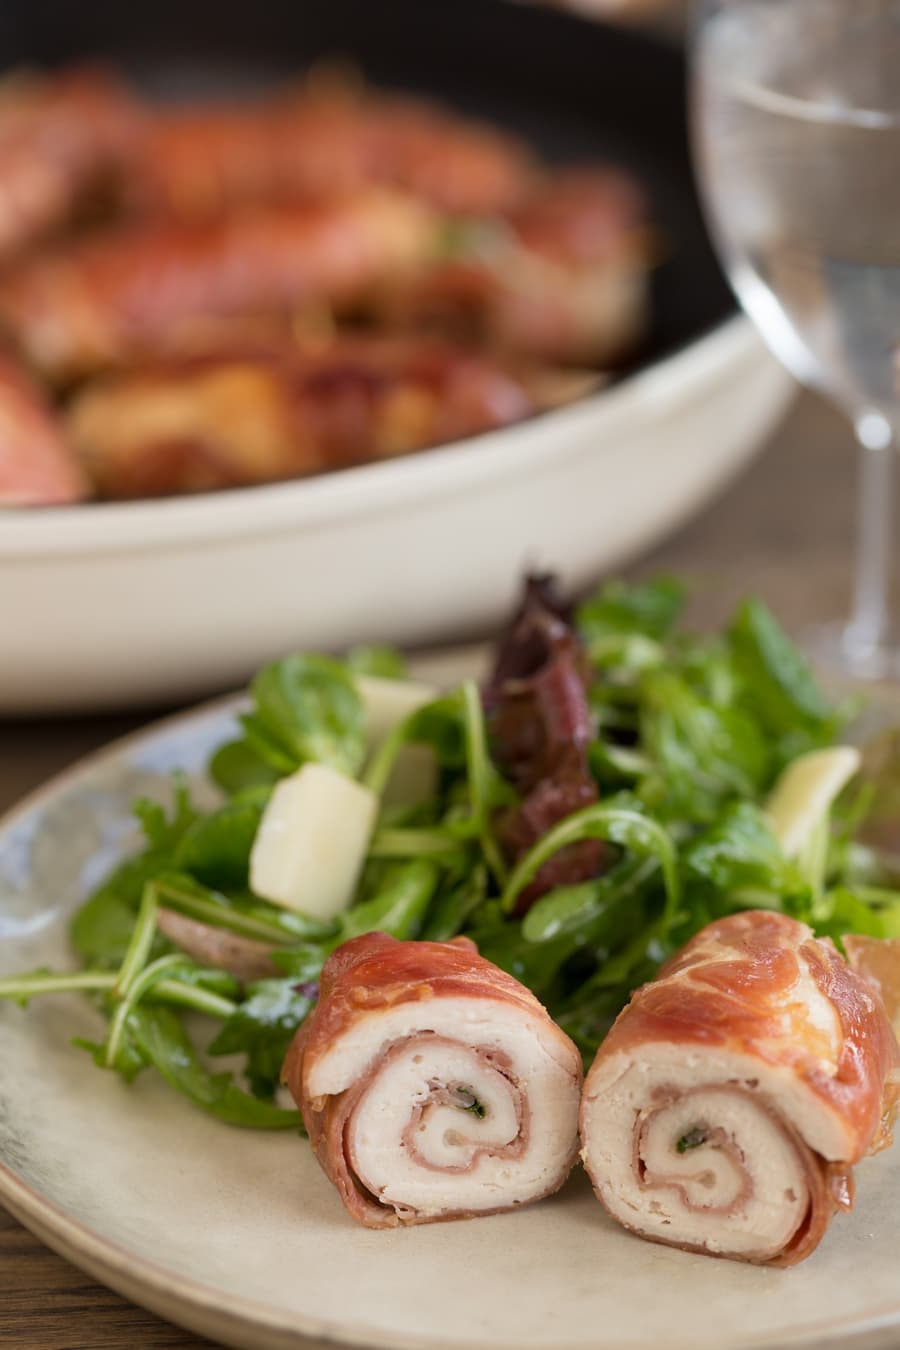 Chicken involtini serving suggestion: with a green salad and parmesan flakes.